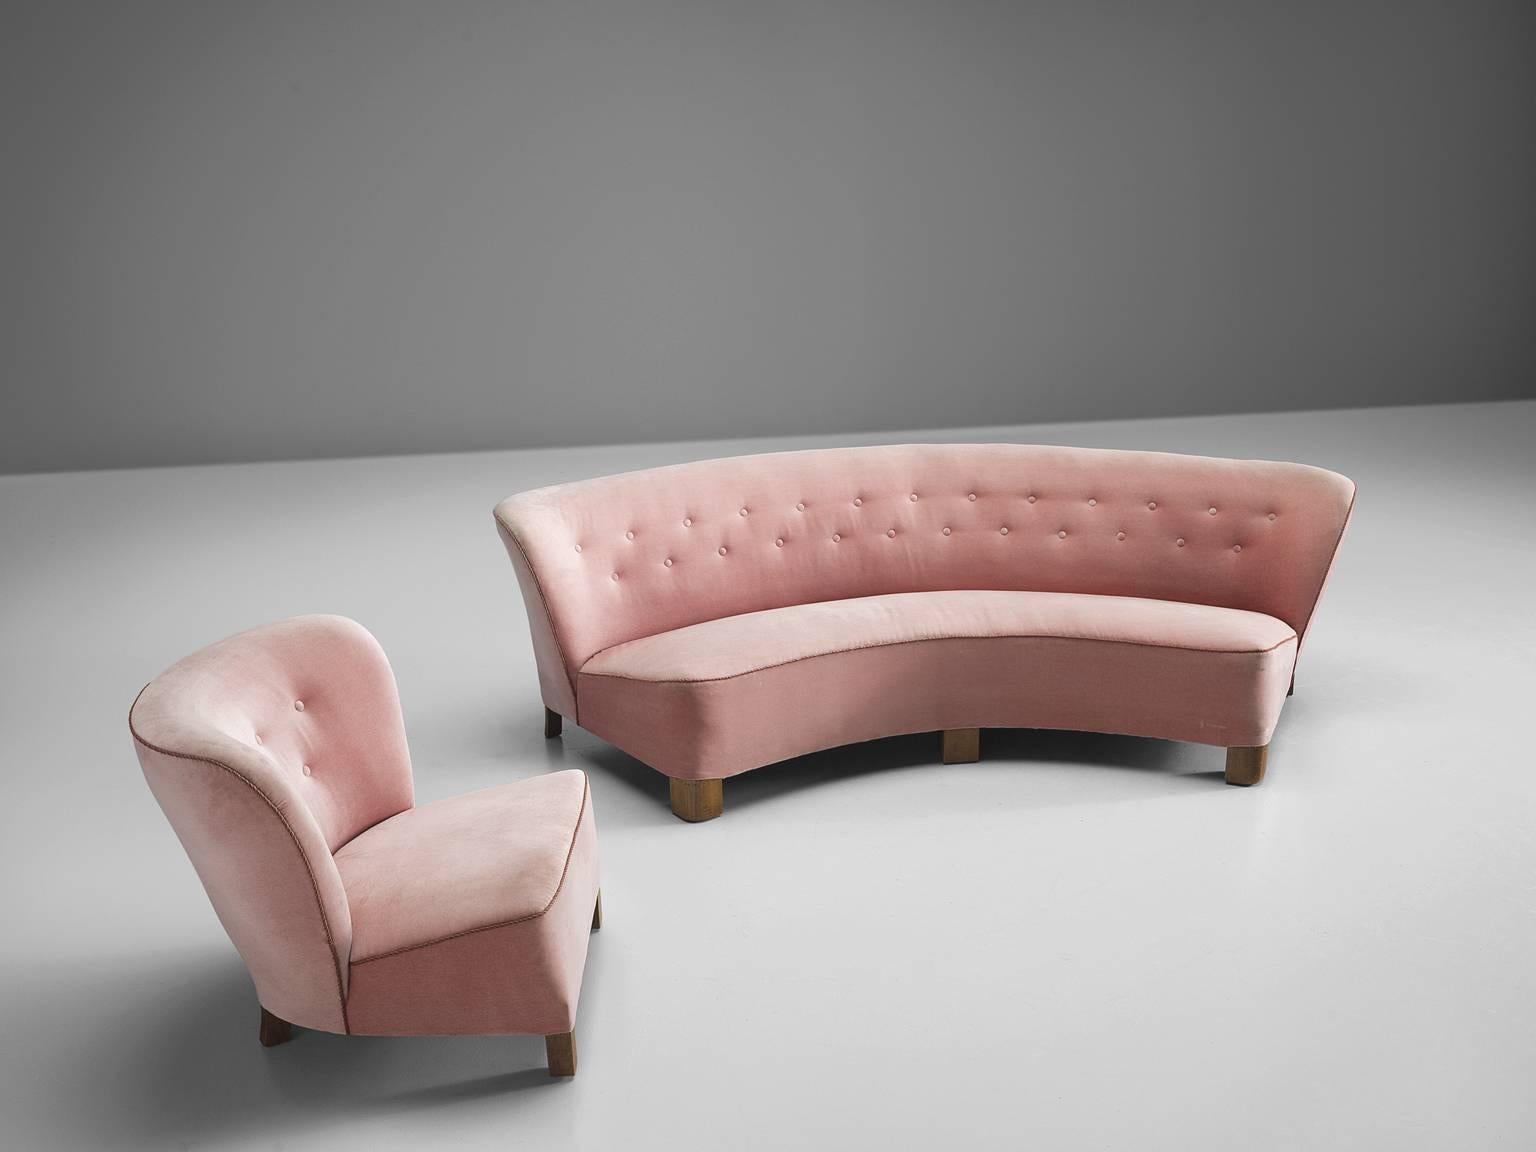 Living room set by Otto Færge, pink fabric, wooden legs, Denmark, 1940

This elegant, curved settee features two quilted lines in the sofa's back. The same design is used in the lounge chair that has a slightly tilted back for maximum comfort. The